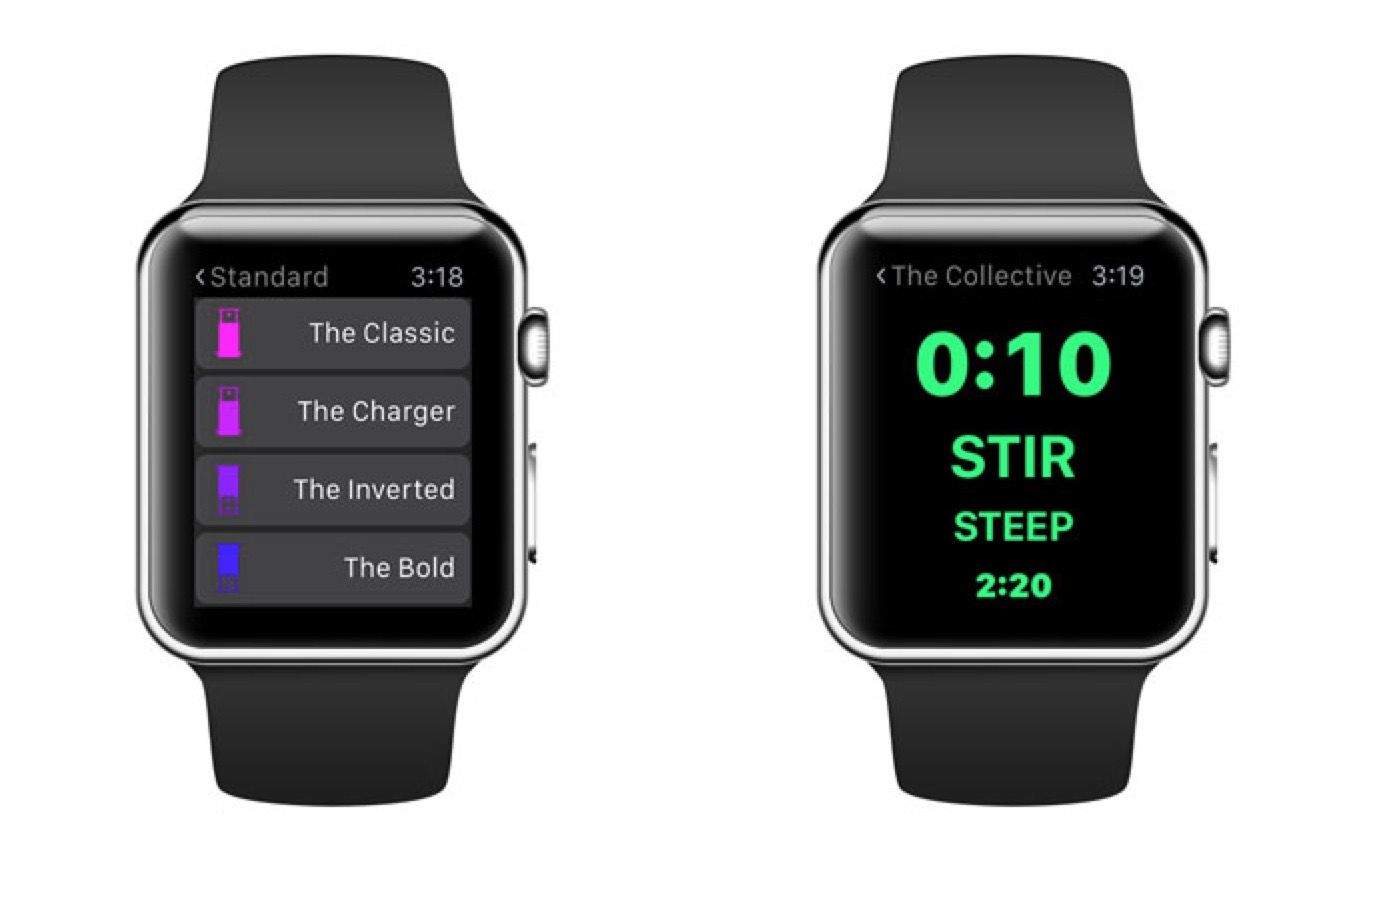 The best Apple Watch apps you may not have heard of